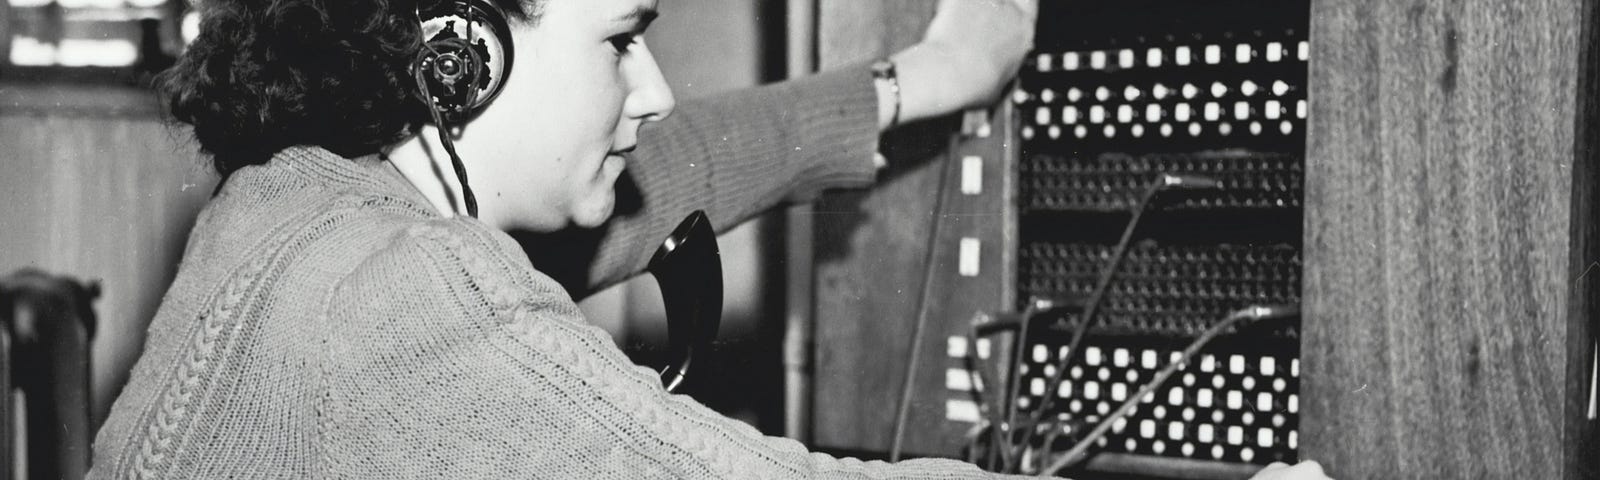 A phone operator circa 1950’s operates a switchboard. She’s wearing a headset and dialing a rotary dial.